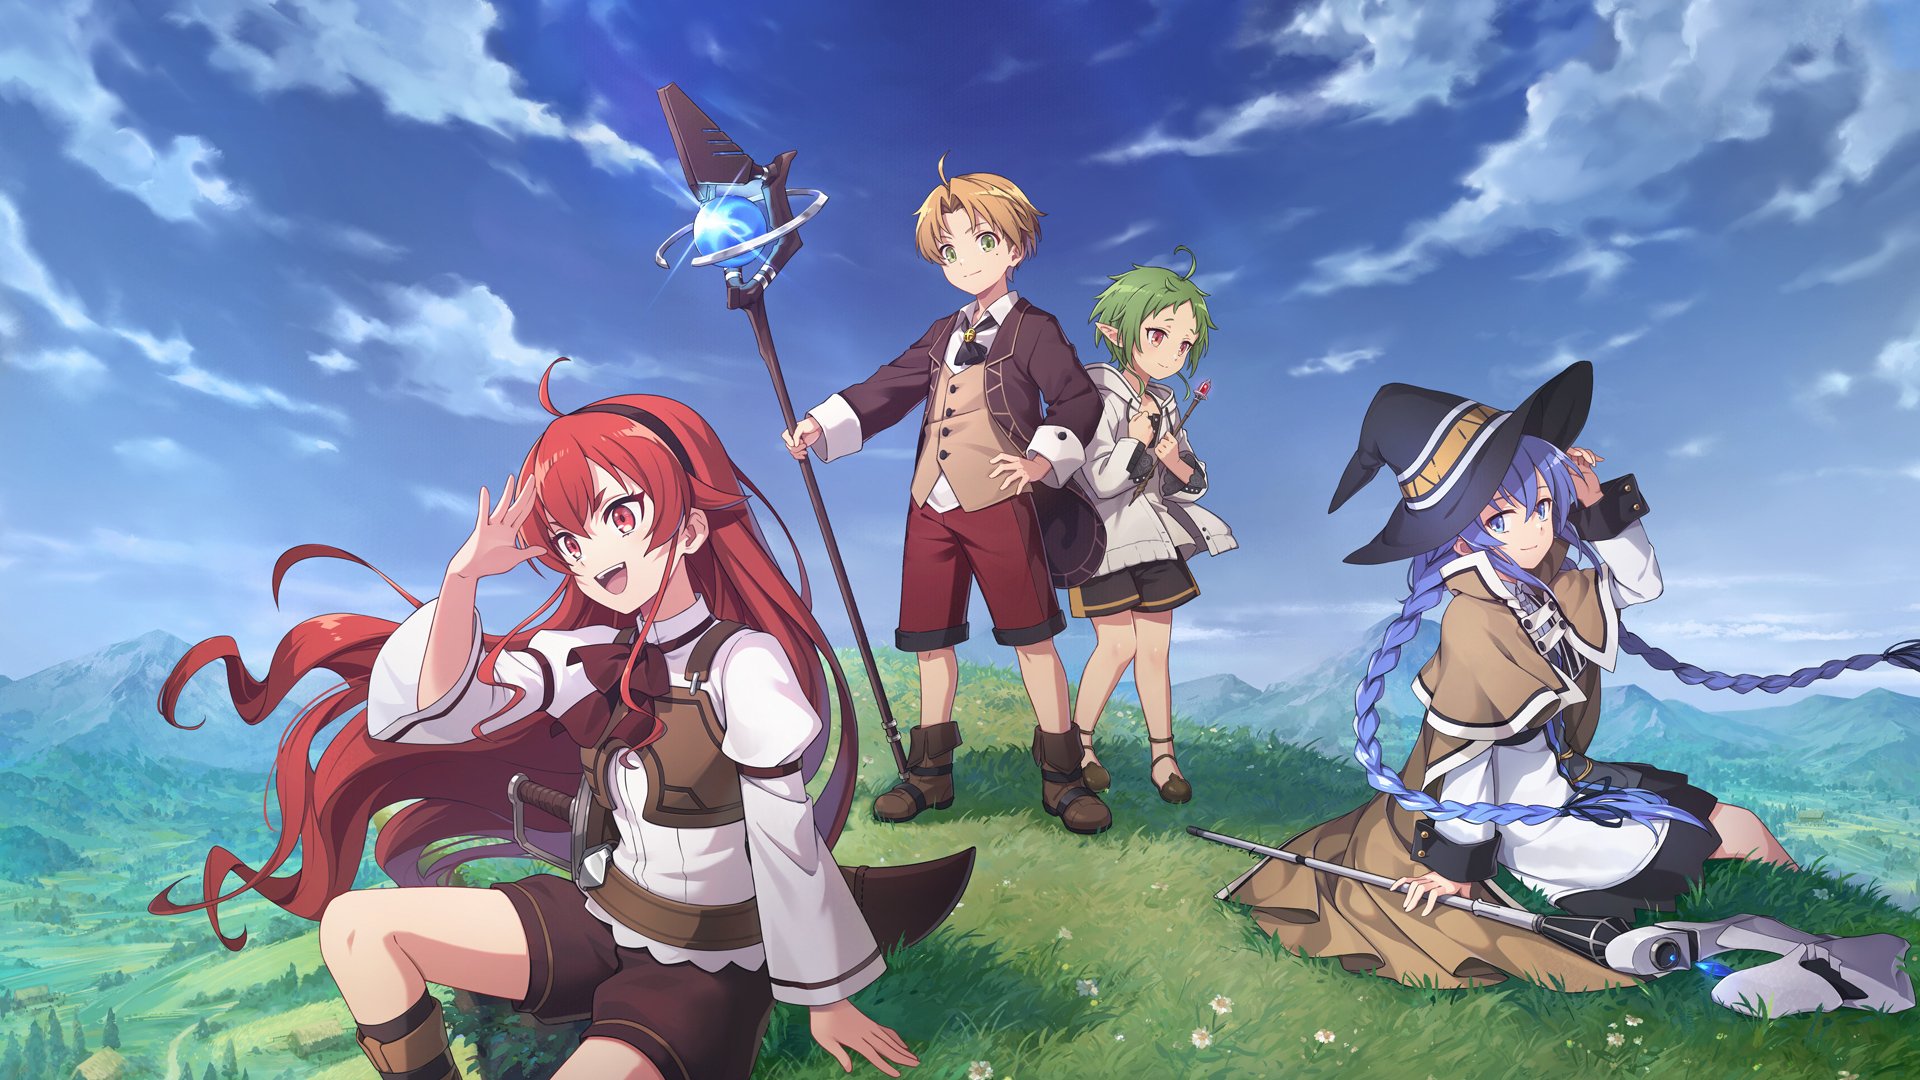 Kolpaper Wallpaper  Roxy Mushoku Tensei Wallpaper Download  httpswwwkolpapercom86424roxymushokutenseiwallpaper Roxy Mushoku  Tensei Wallpaper for mobile phone tablet desktop computer and other  devices HD and 4K wallpapers Discover more 